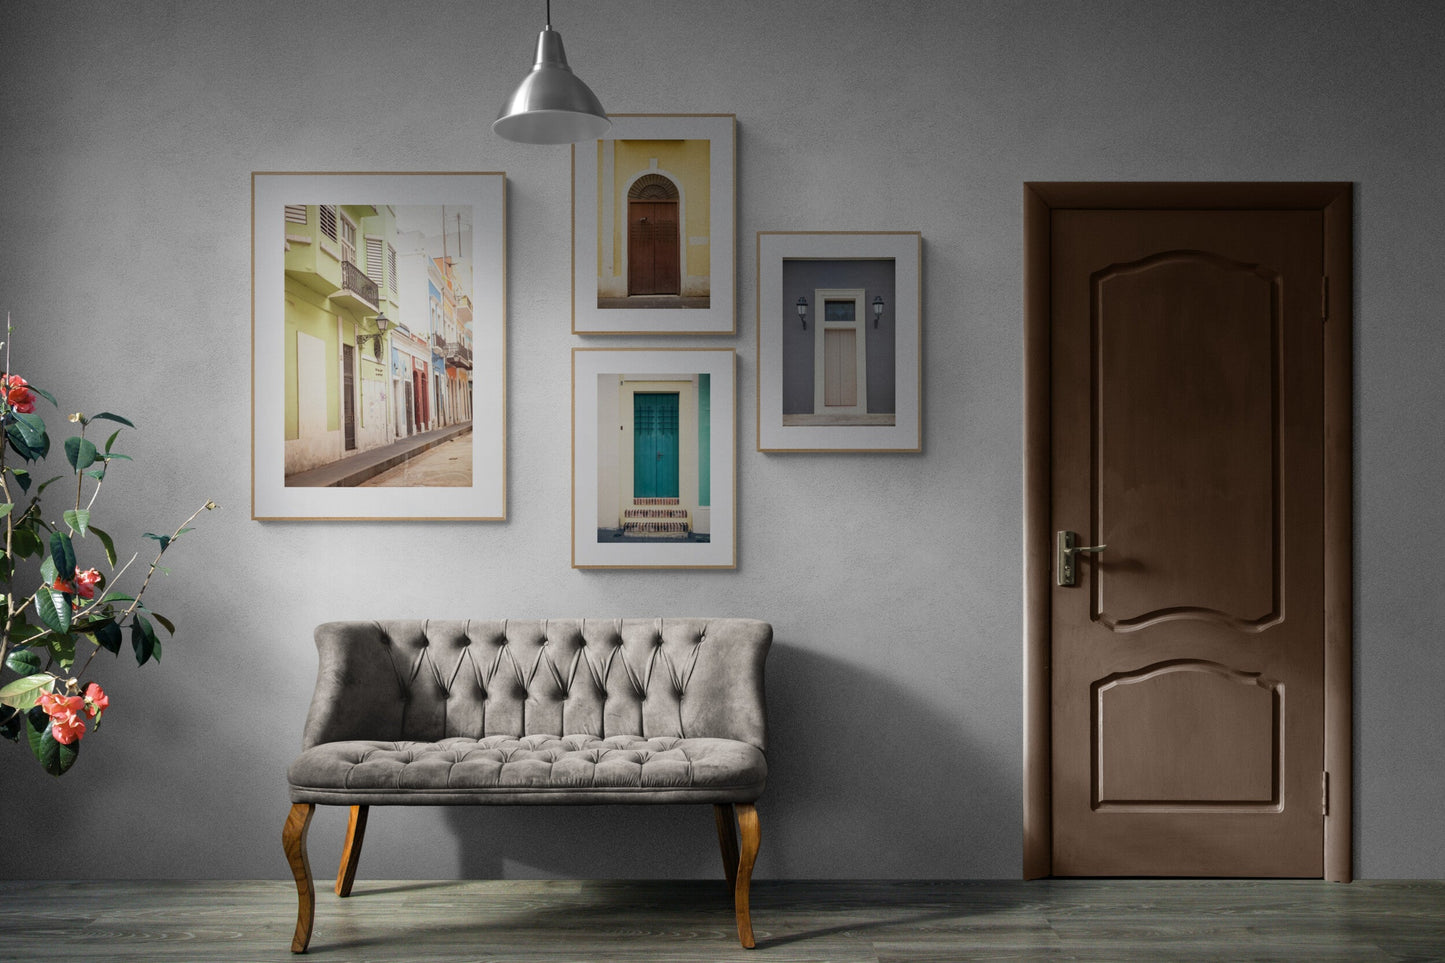 Collection of 4 puerto rico door photographs as wall art prints in a hallway 